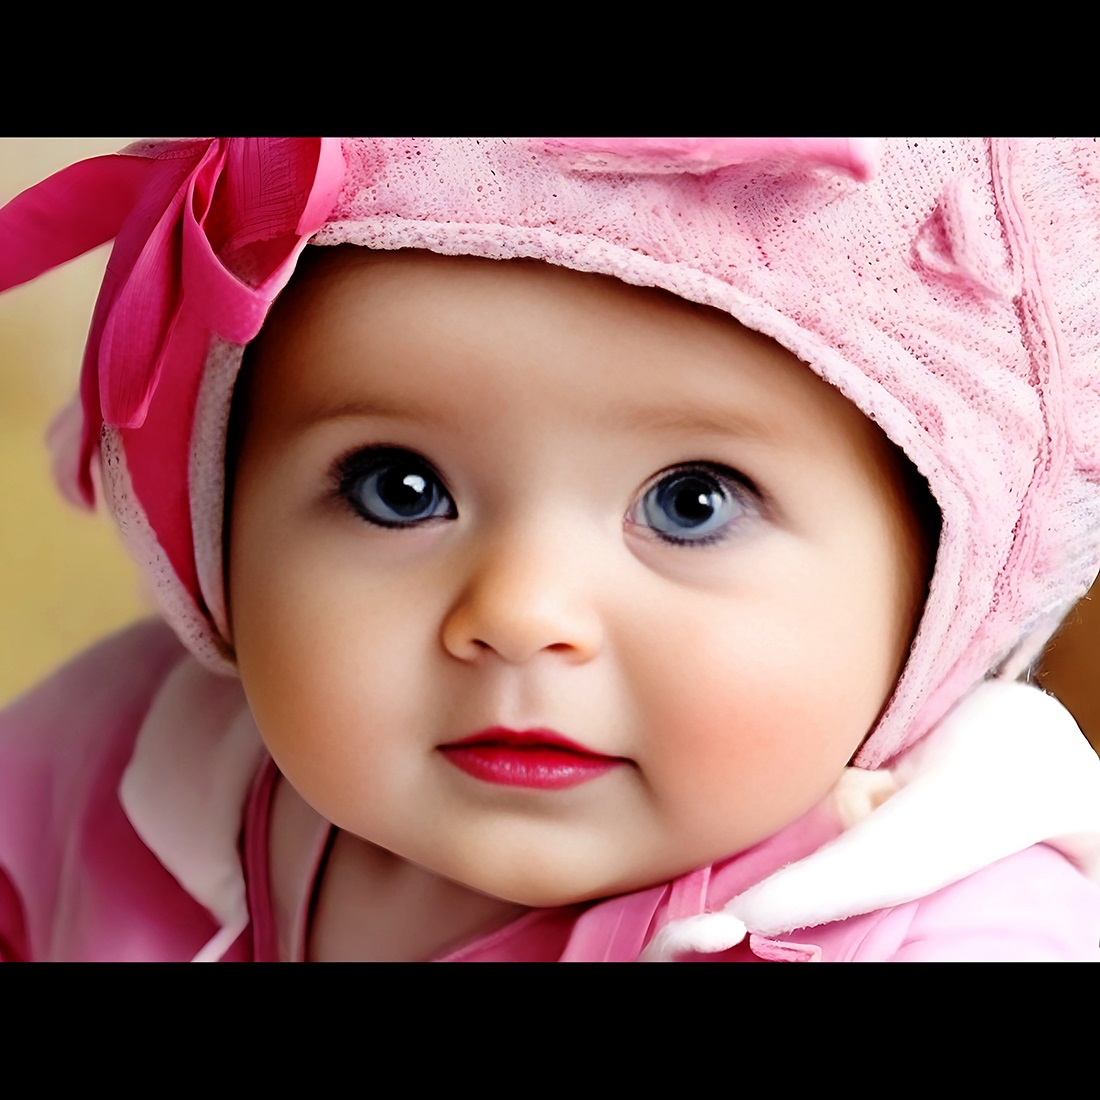 Portrait Of Adorable Baby Girl Wearing Pink Dress v4 preview image.